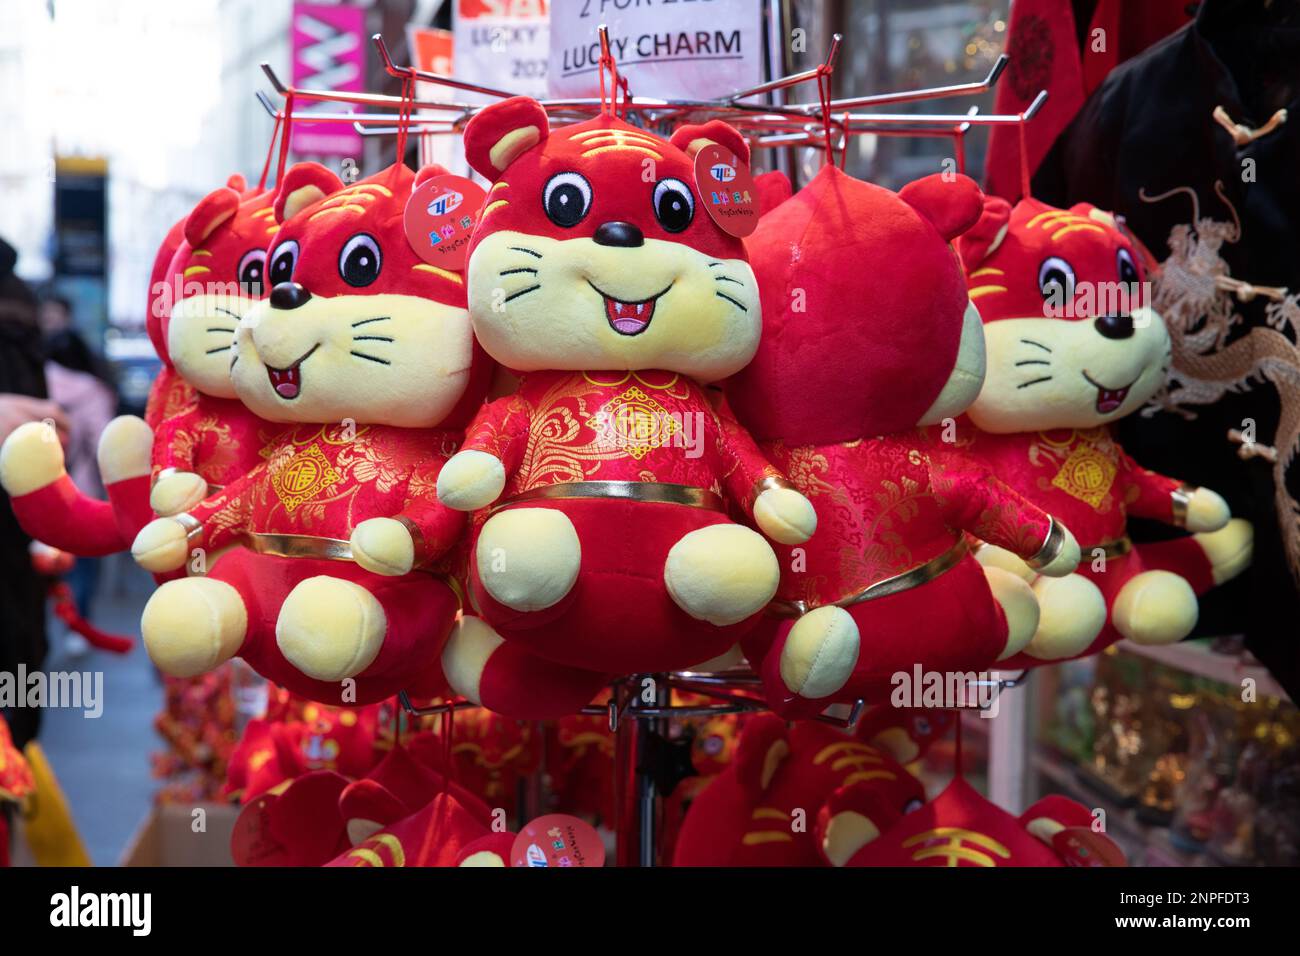 In Chinatown in London, cuddly tiger toys are on sale to celebrate the Chinese New Year and the Year of the Tiger. Stock Photo